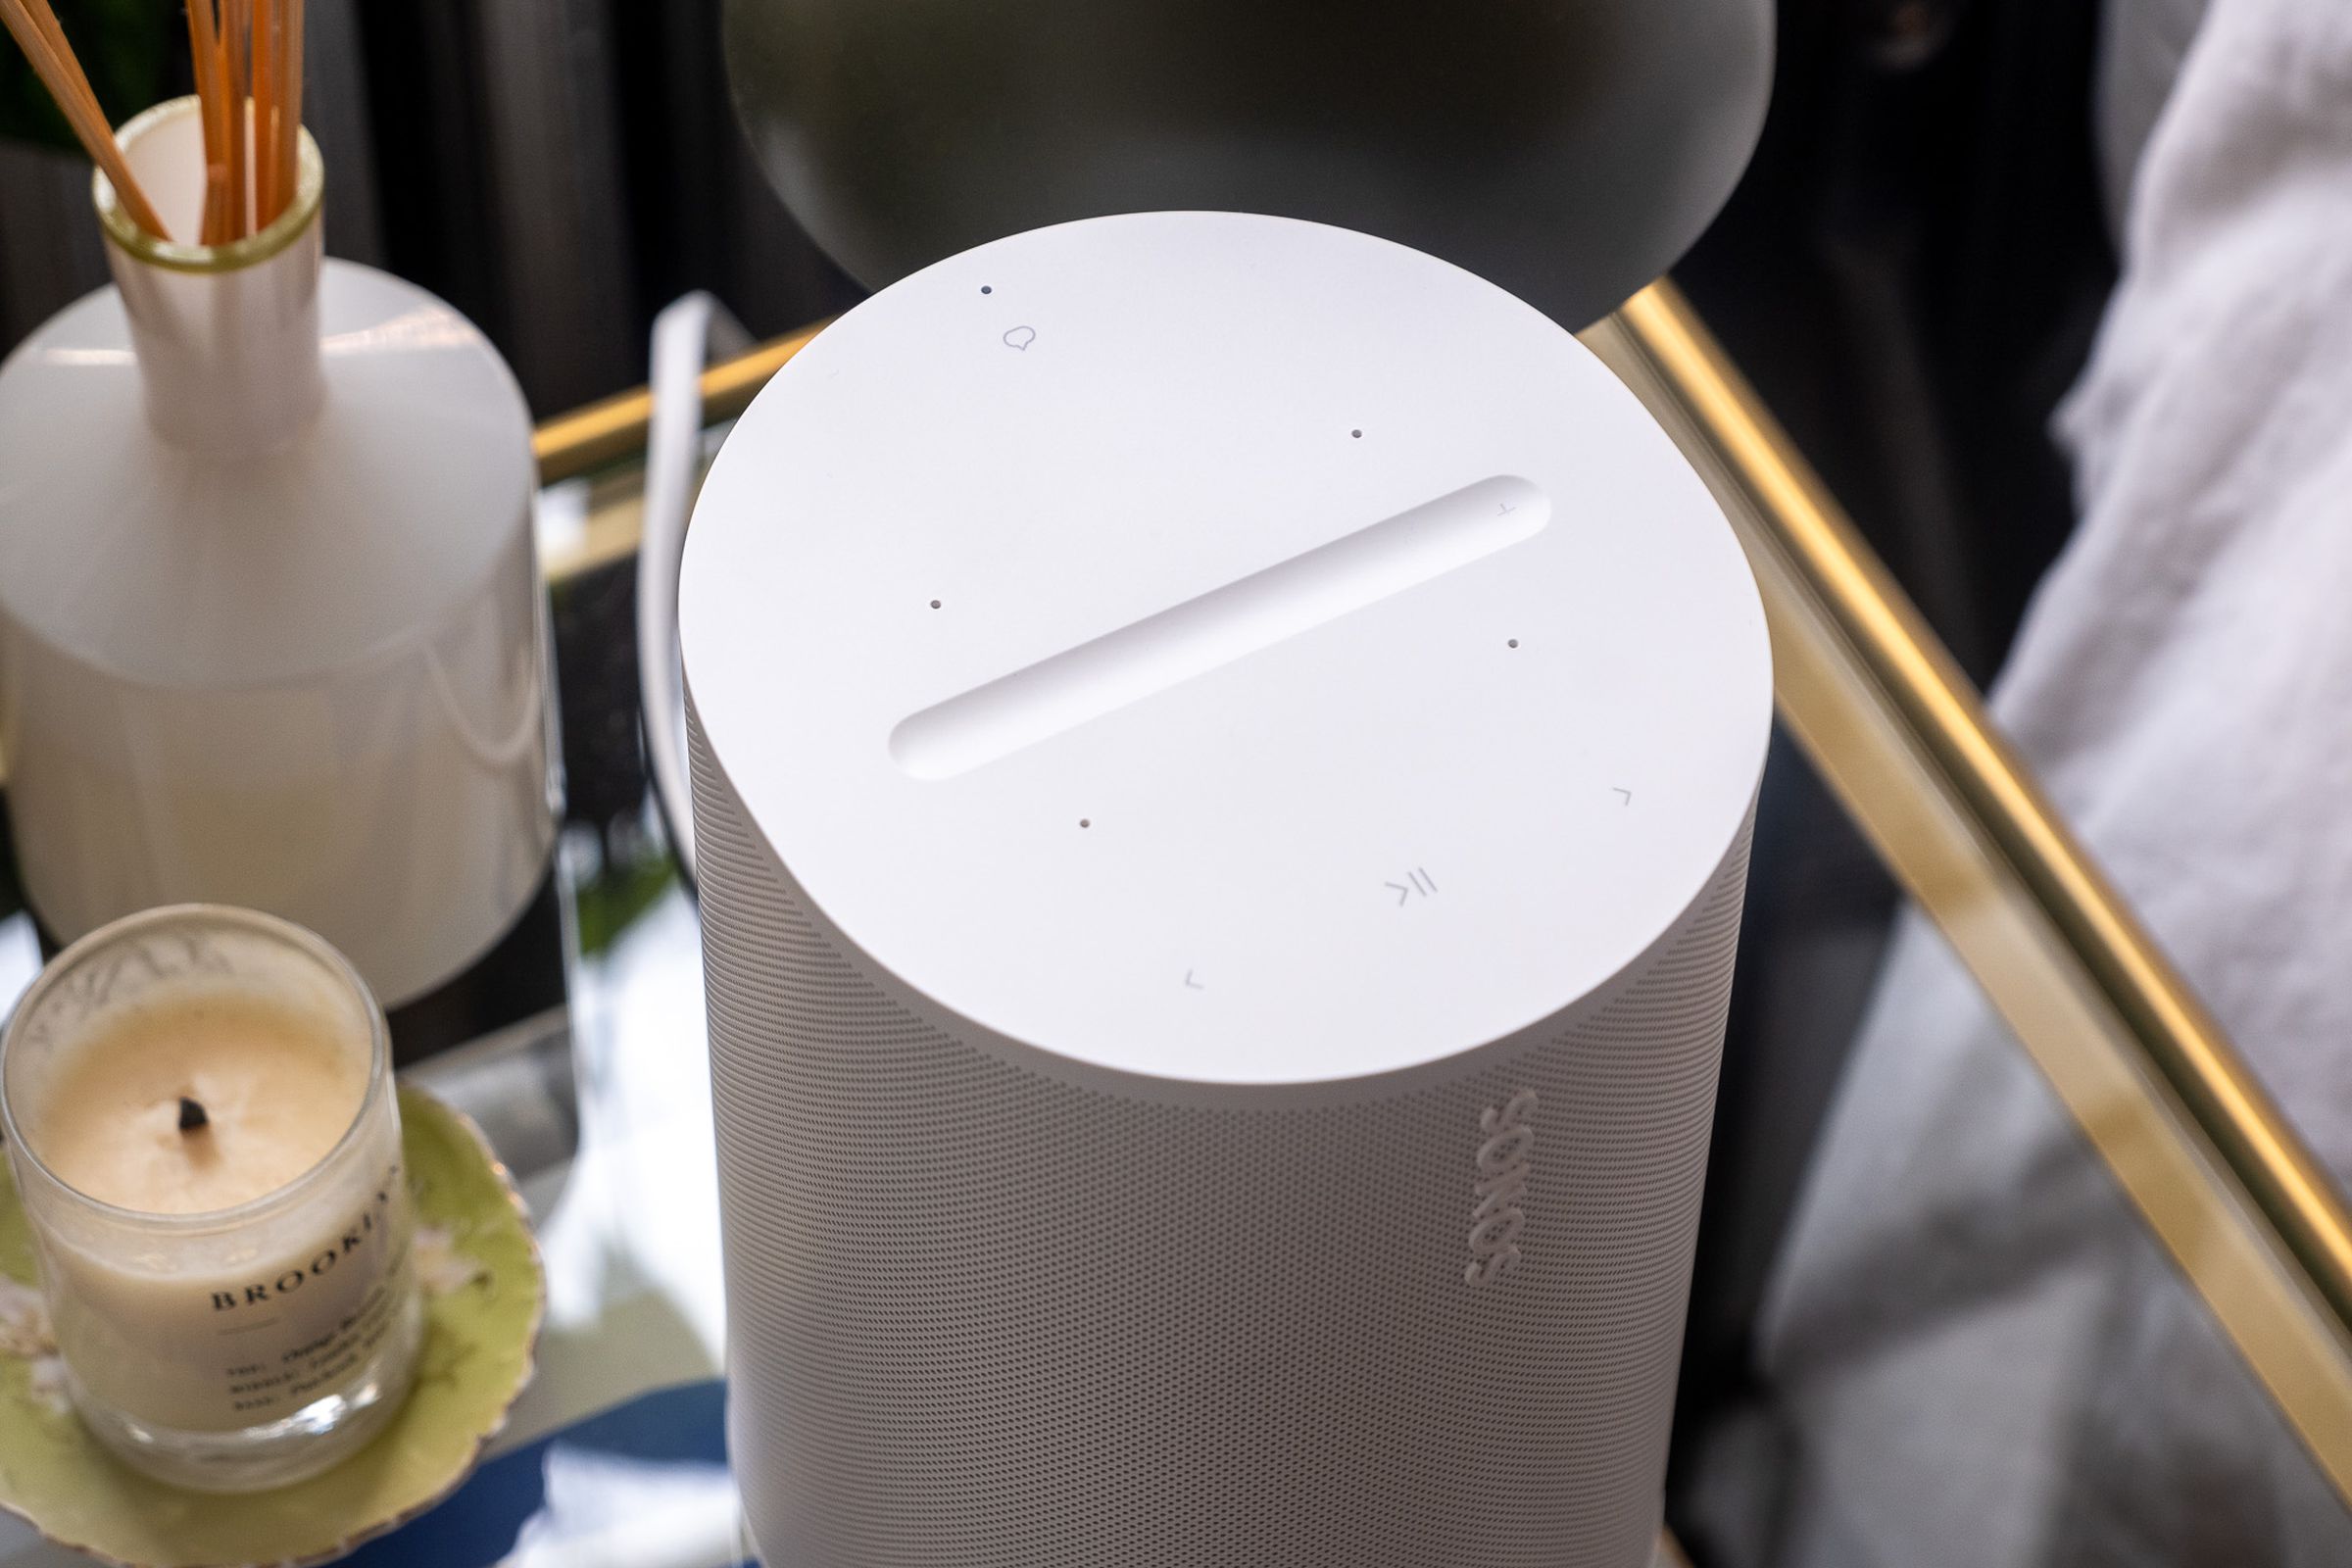 A photo of the Sonos Era 100 speaker on a bedside nightstand.